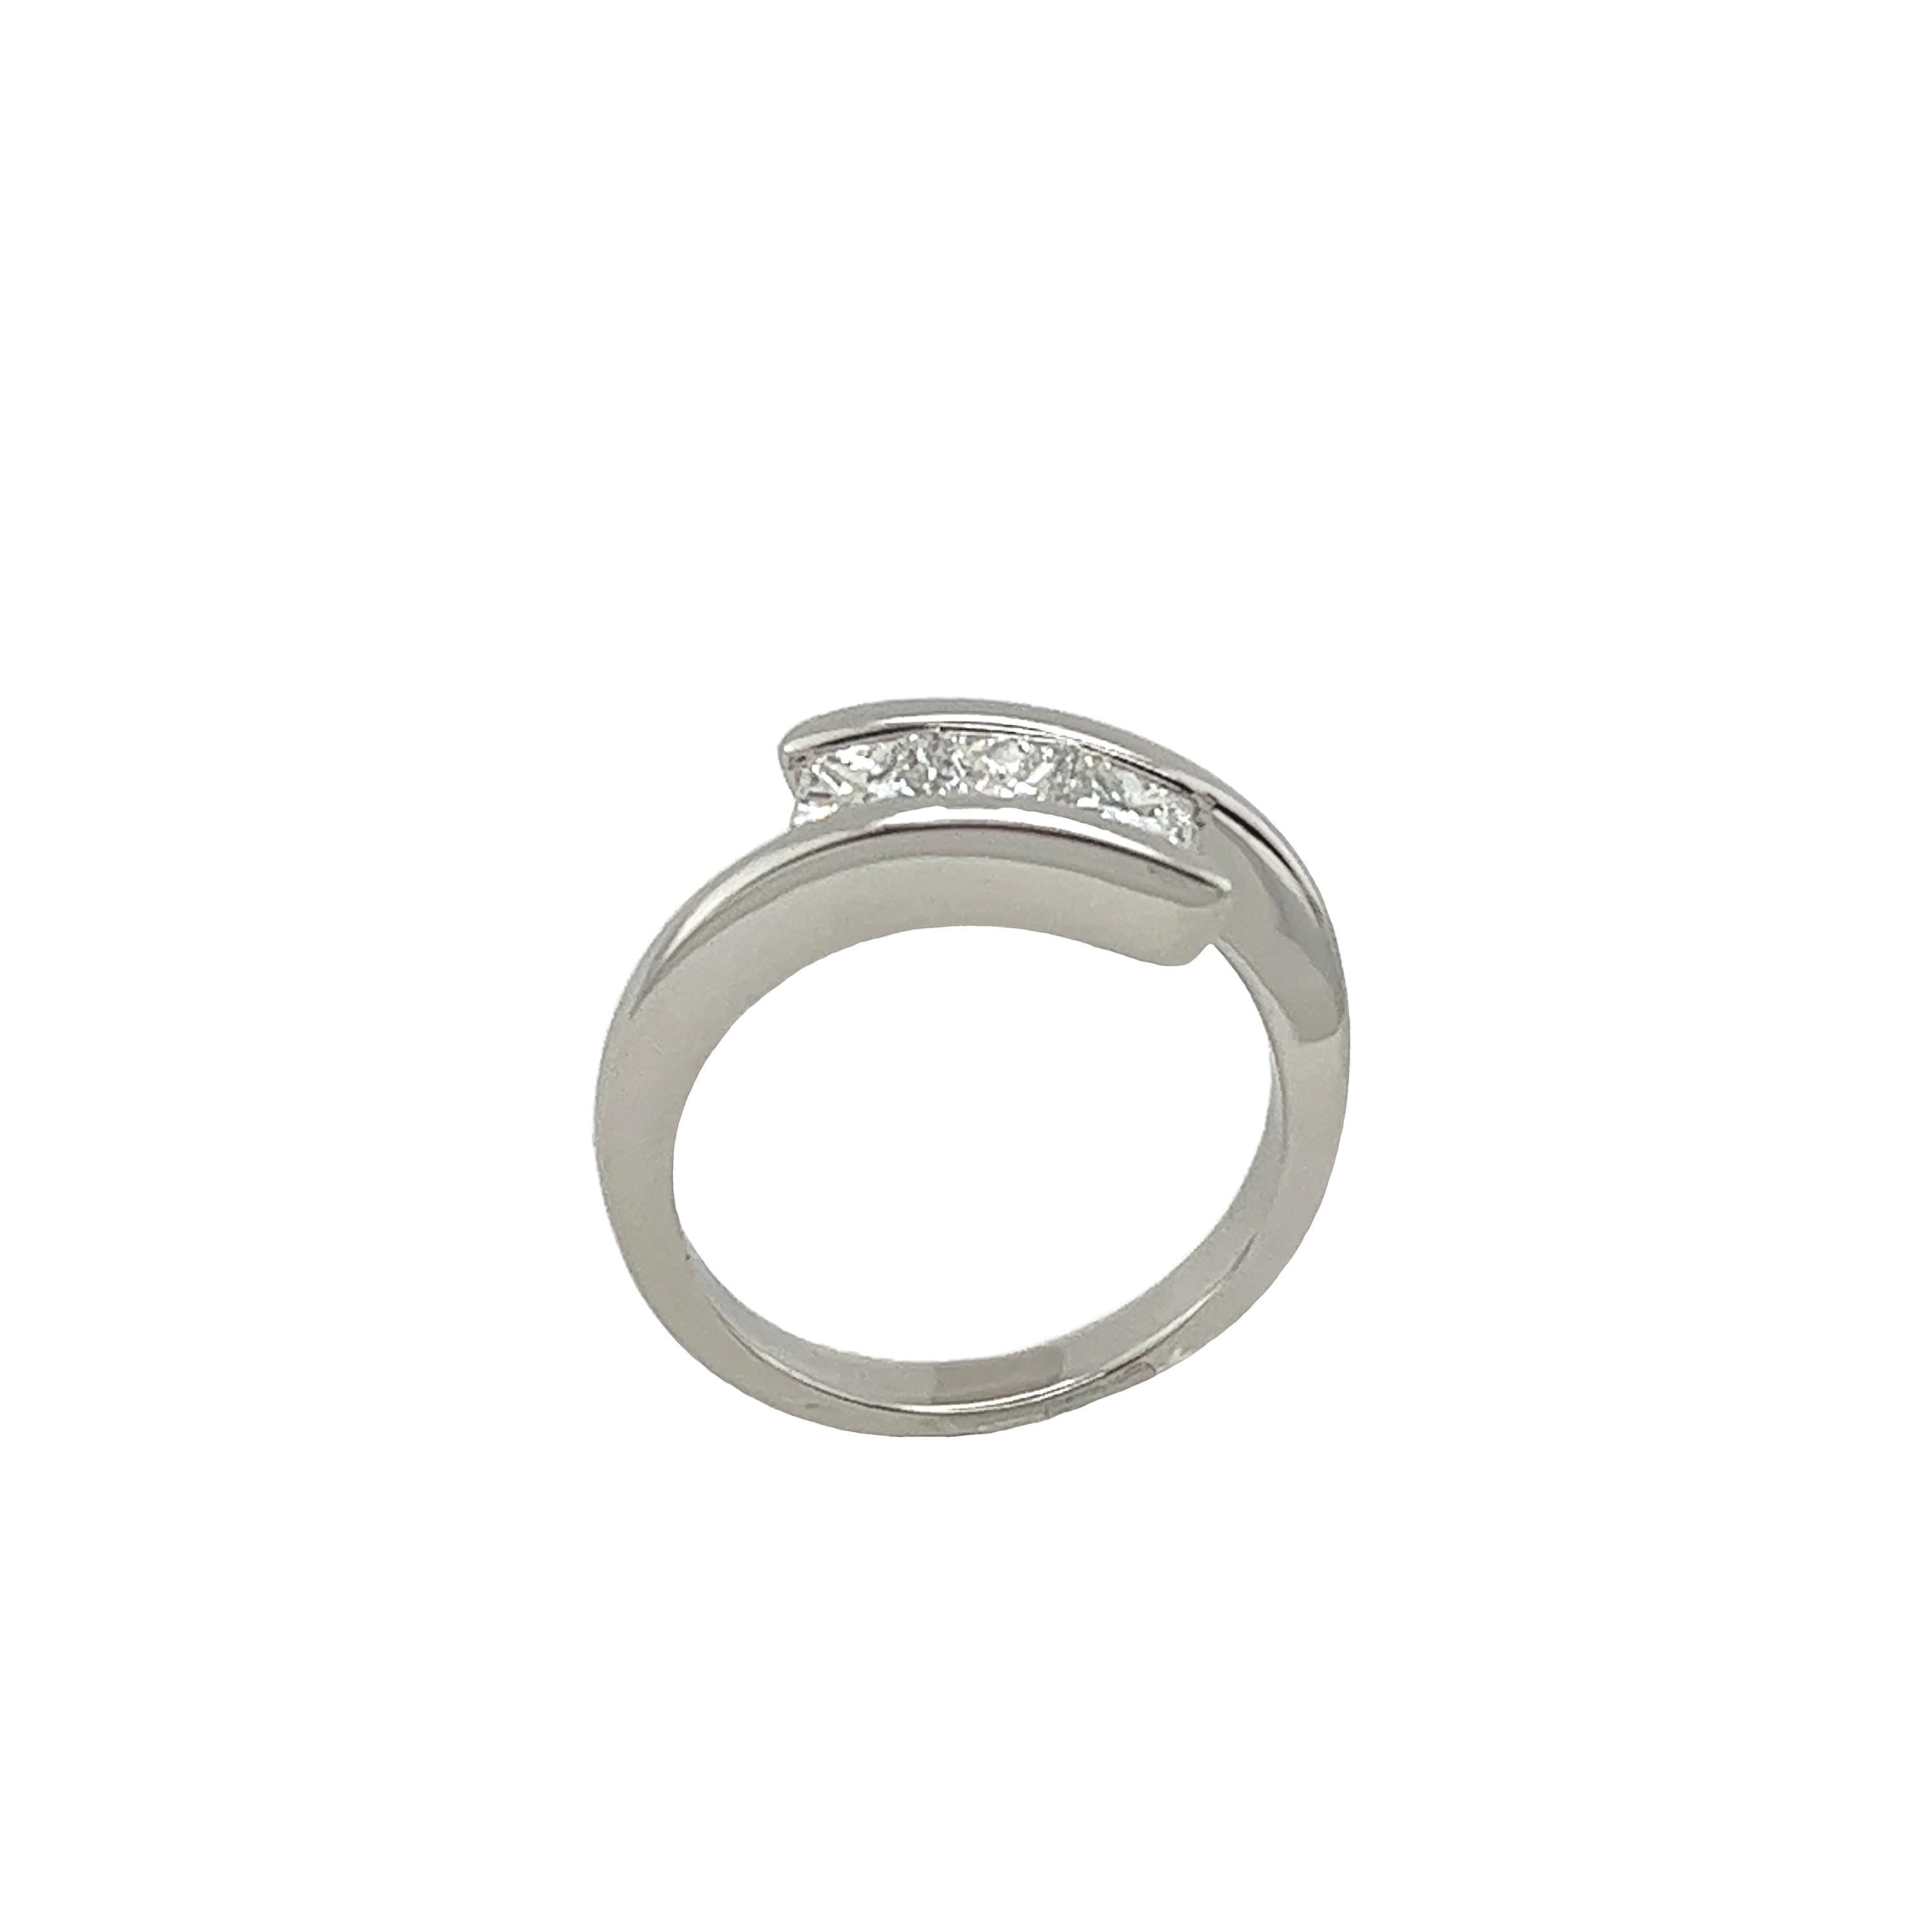 This magnificent diamond 3-stone ring is set with 0.80ct G/H colour VS1 clarity princess cut diamonds. Set in Platinum.
This ring is elegant and beautiful for a wedding ring or anniversary ring.

Total Diamond Weight: 0.80ct 
Diamond Colour: